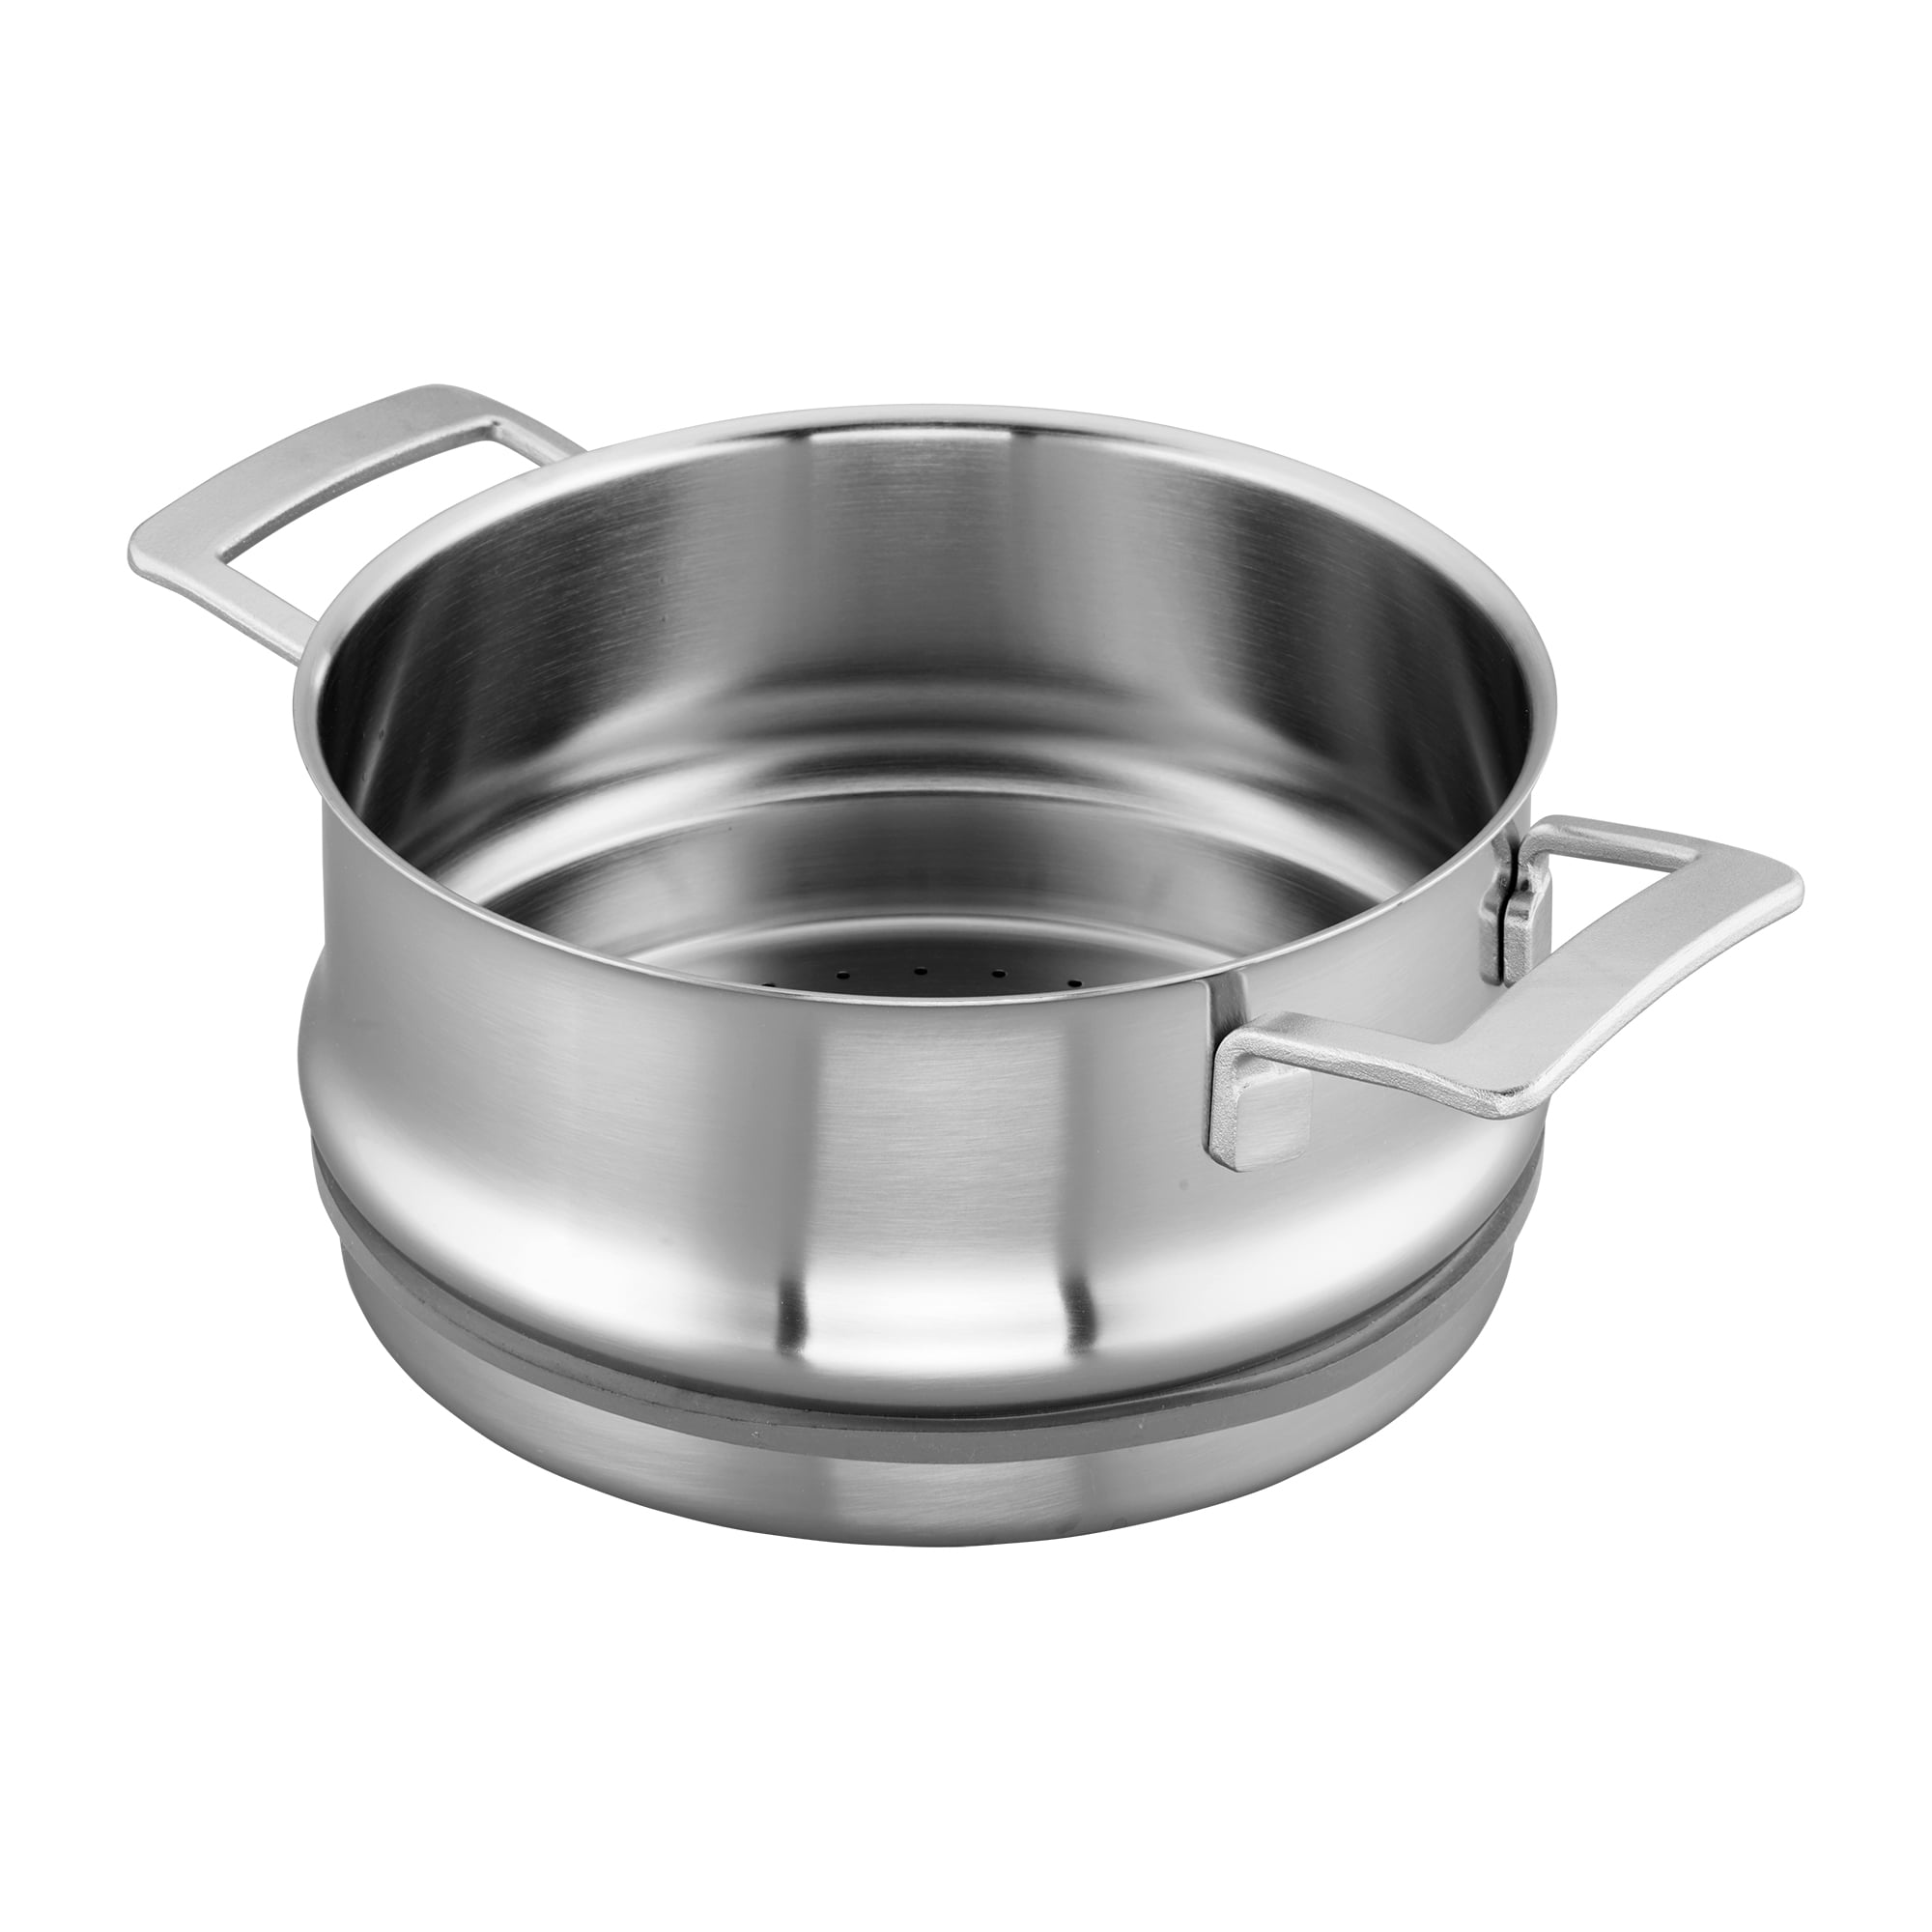 Buy Demeyere Industry 5 Stock pot with lid